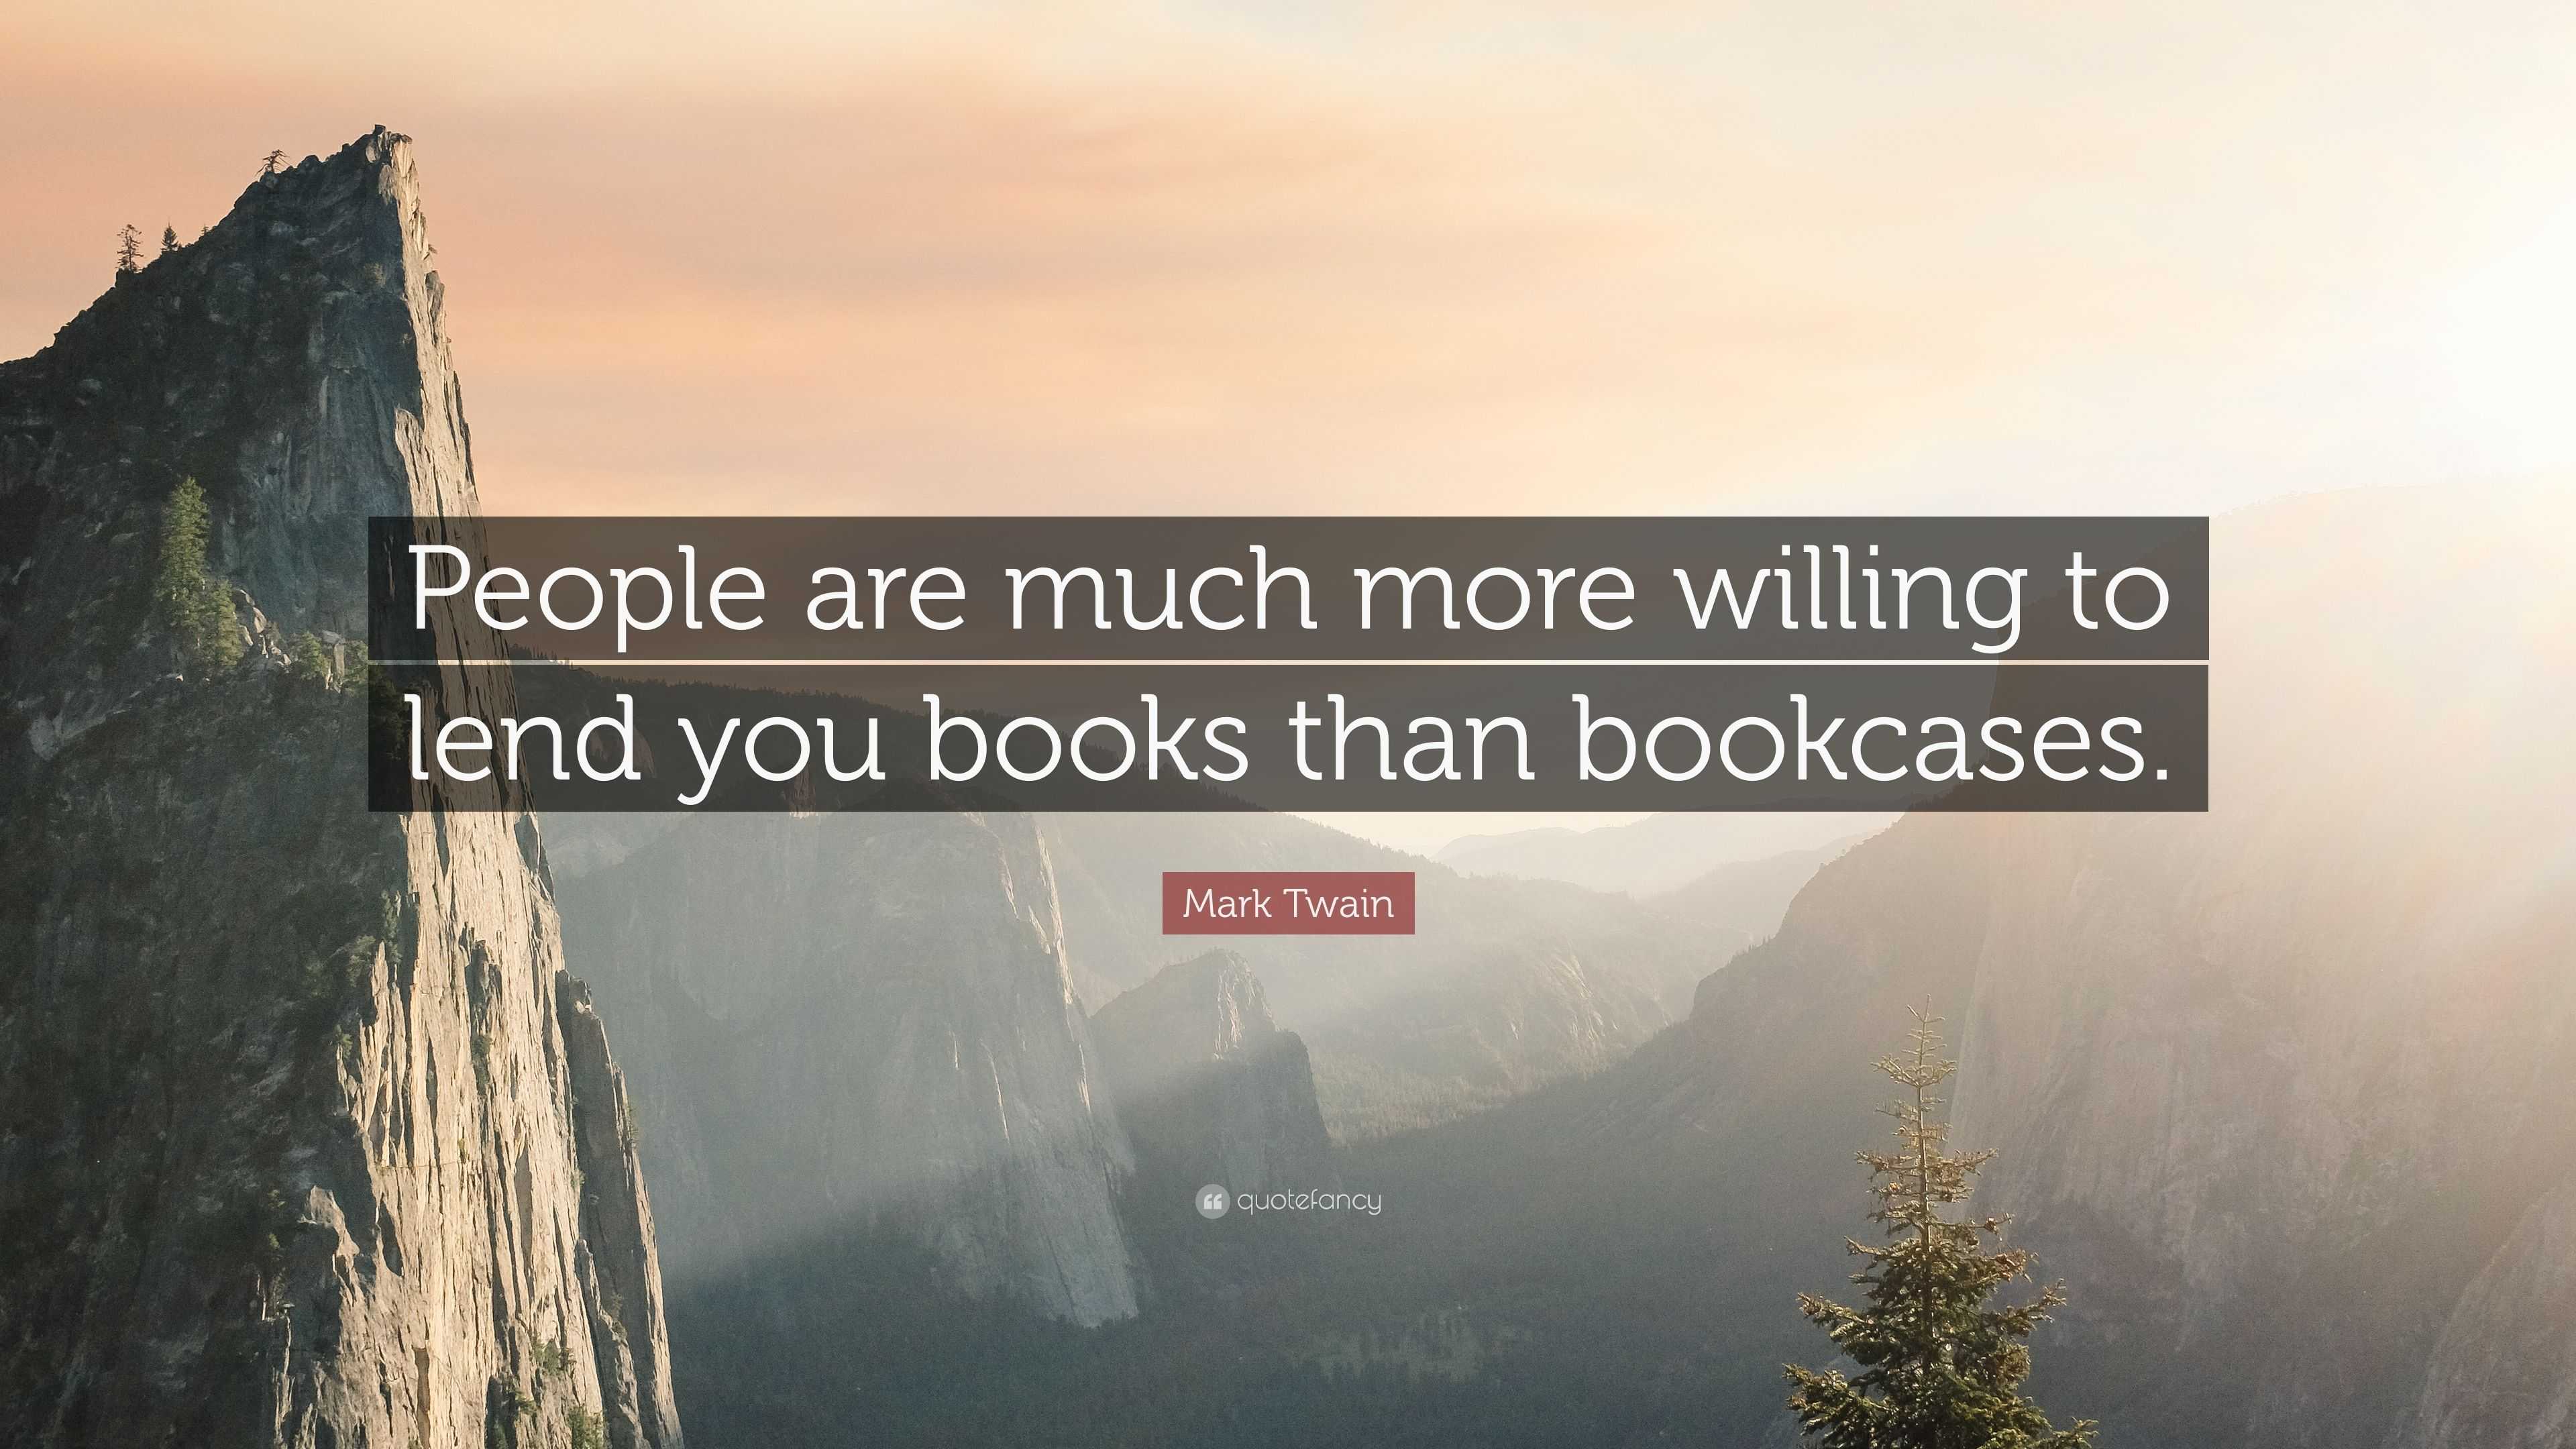 Mark Twain Quote: “People are much more willing to lend you books than ...